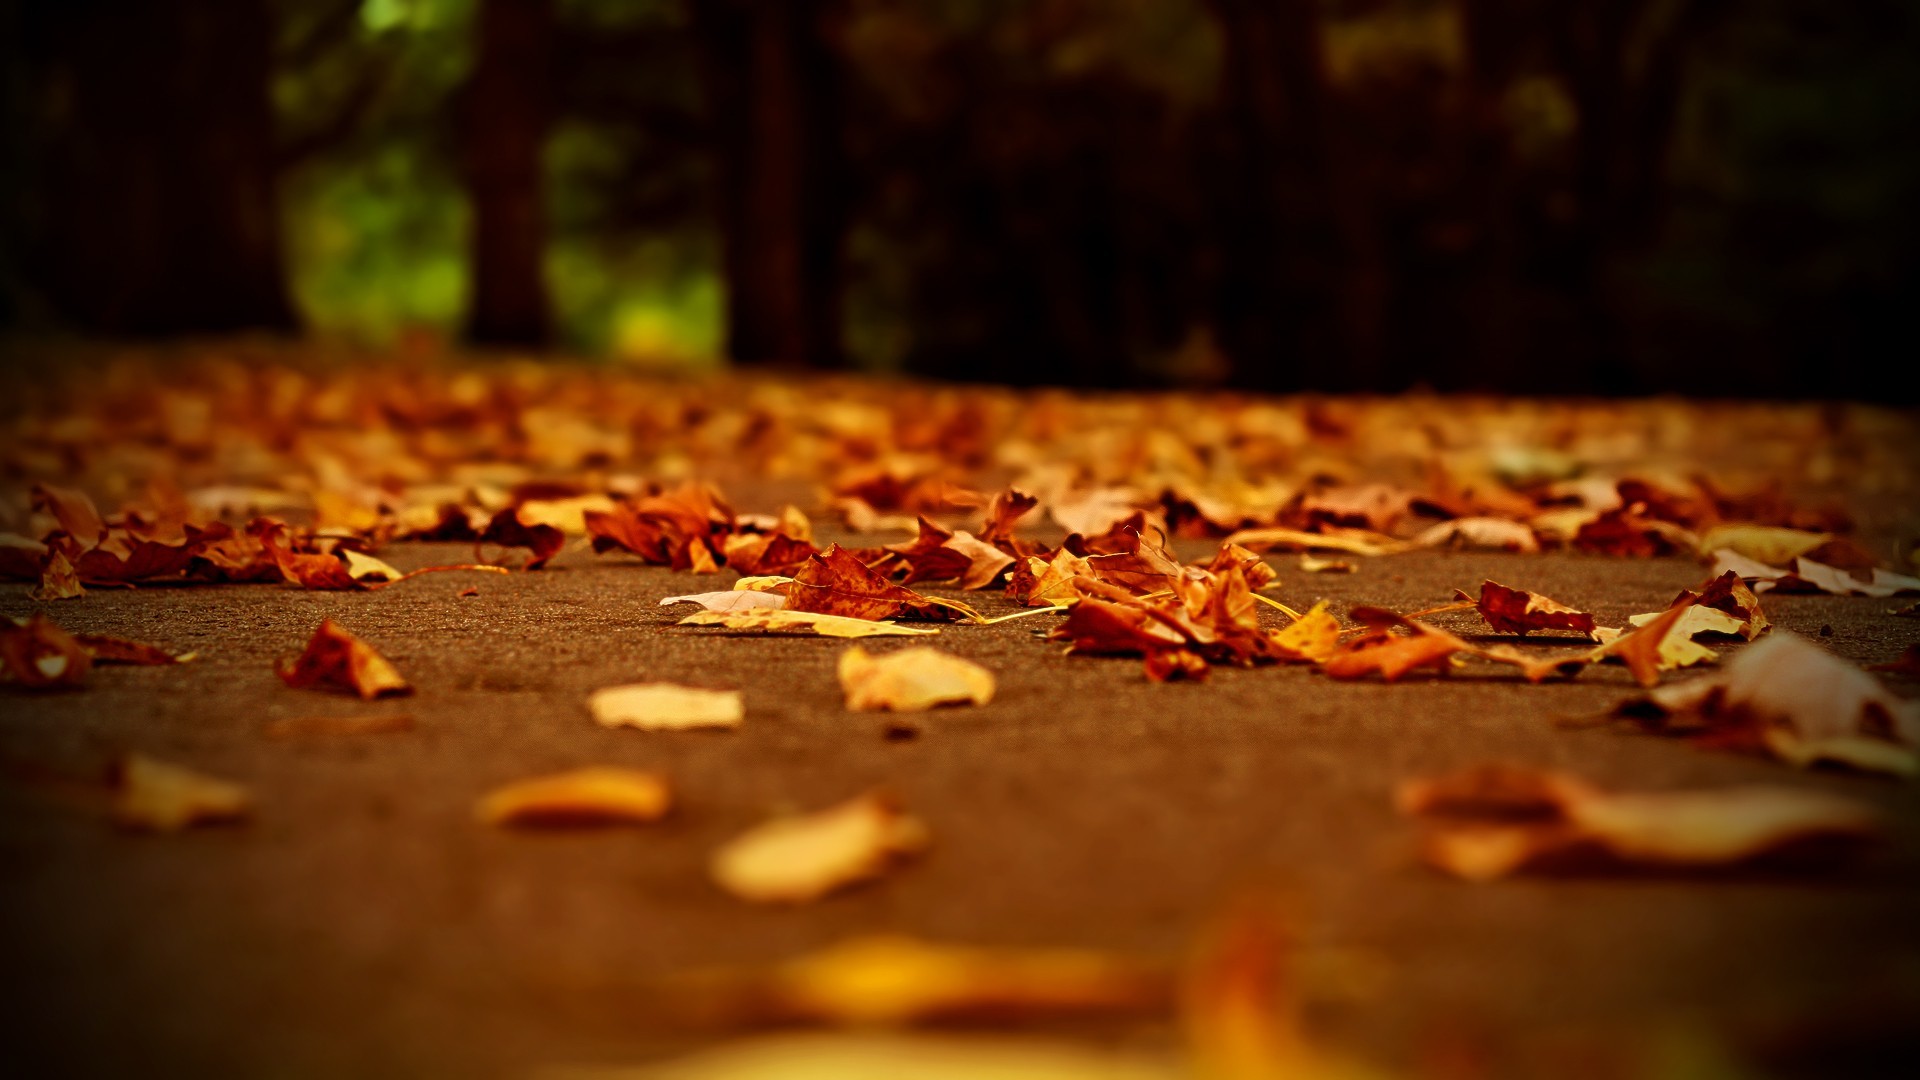 1920x1080 Find this Pin and more on Beauty. autumn leaves depth of field fallen  leaves wallpaper